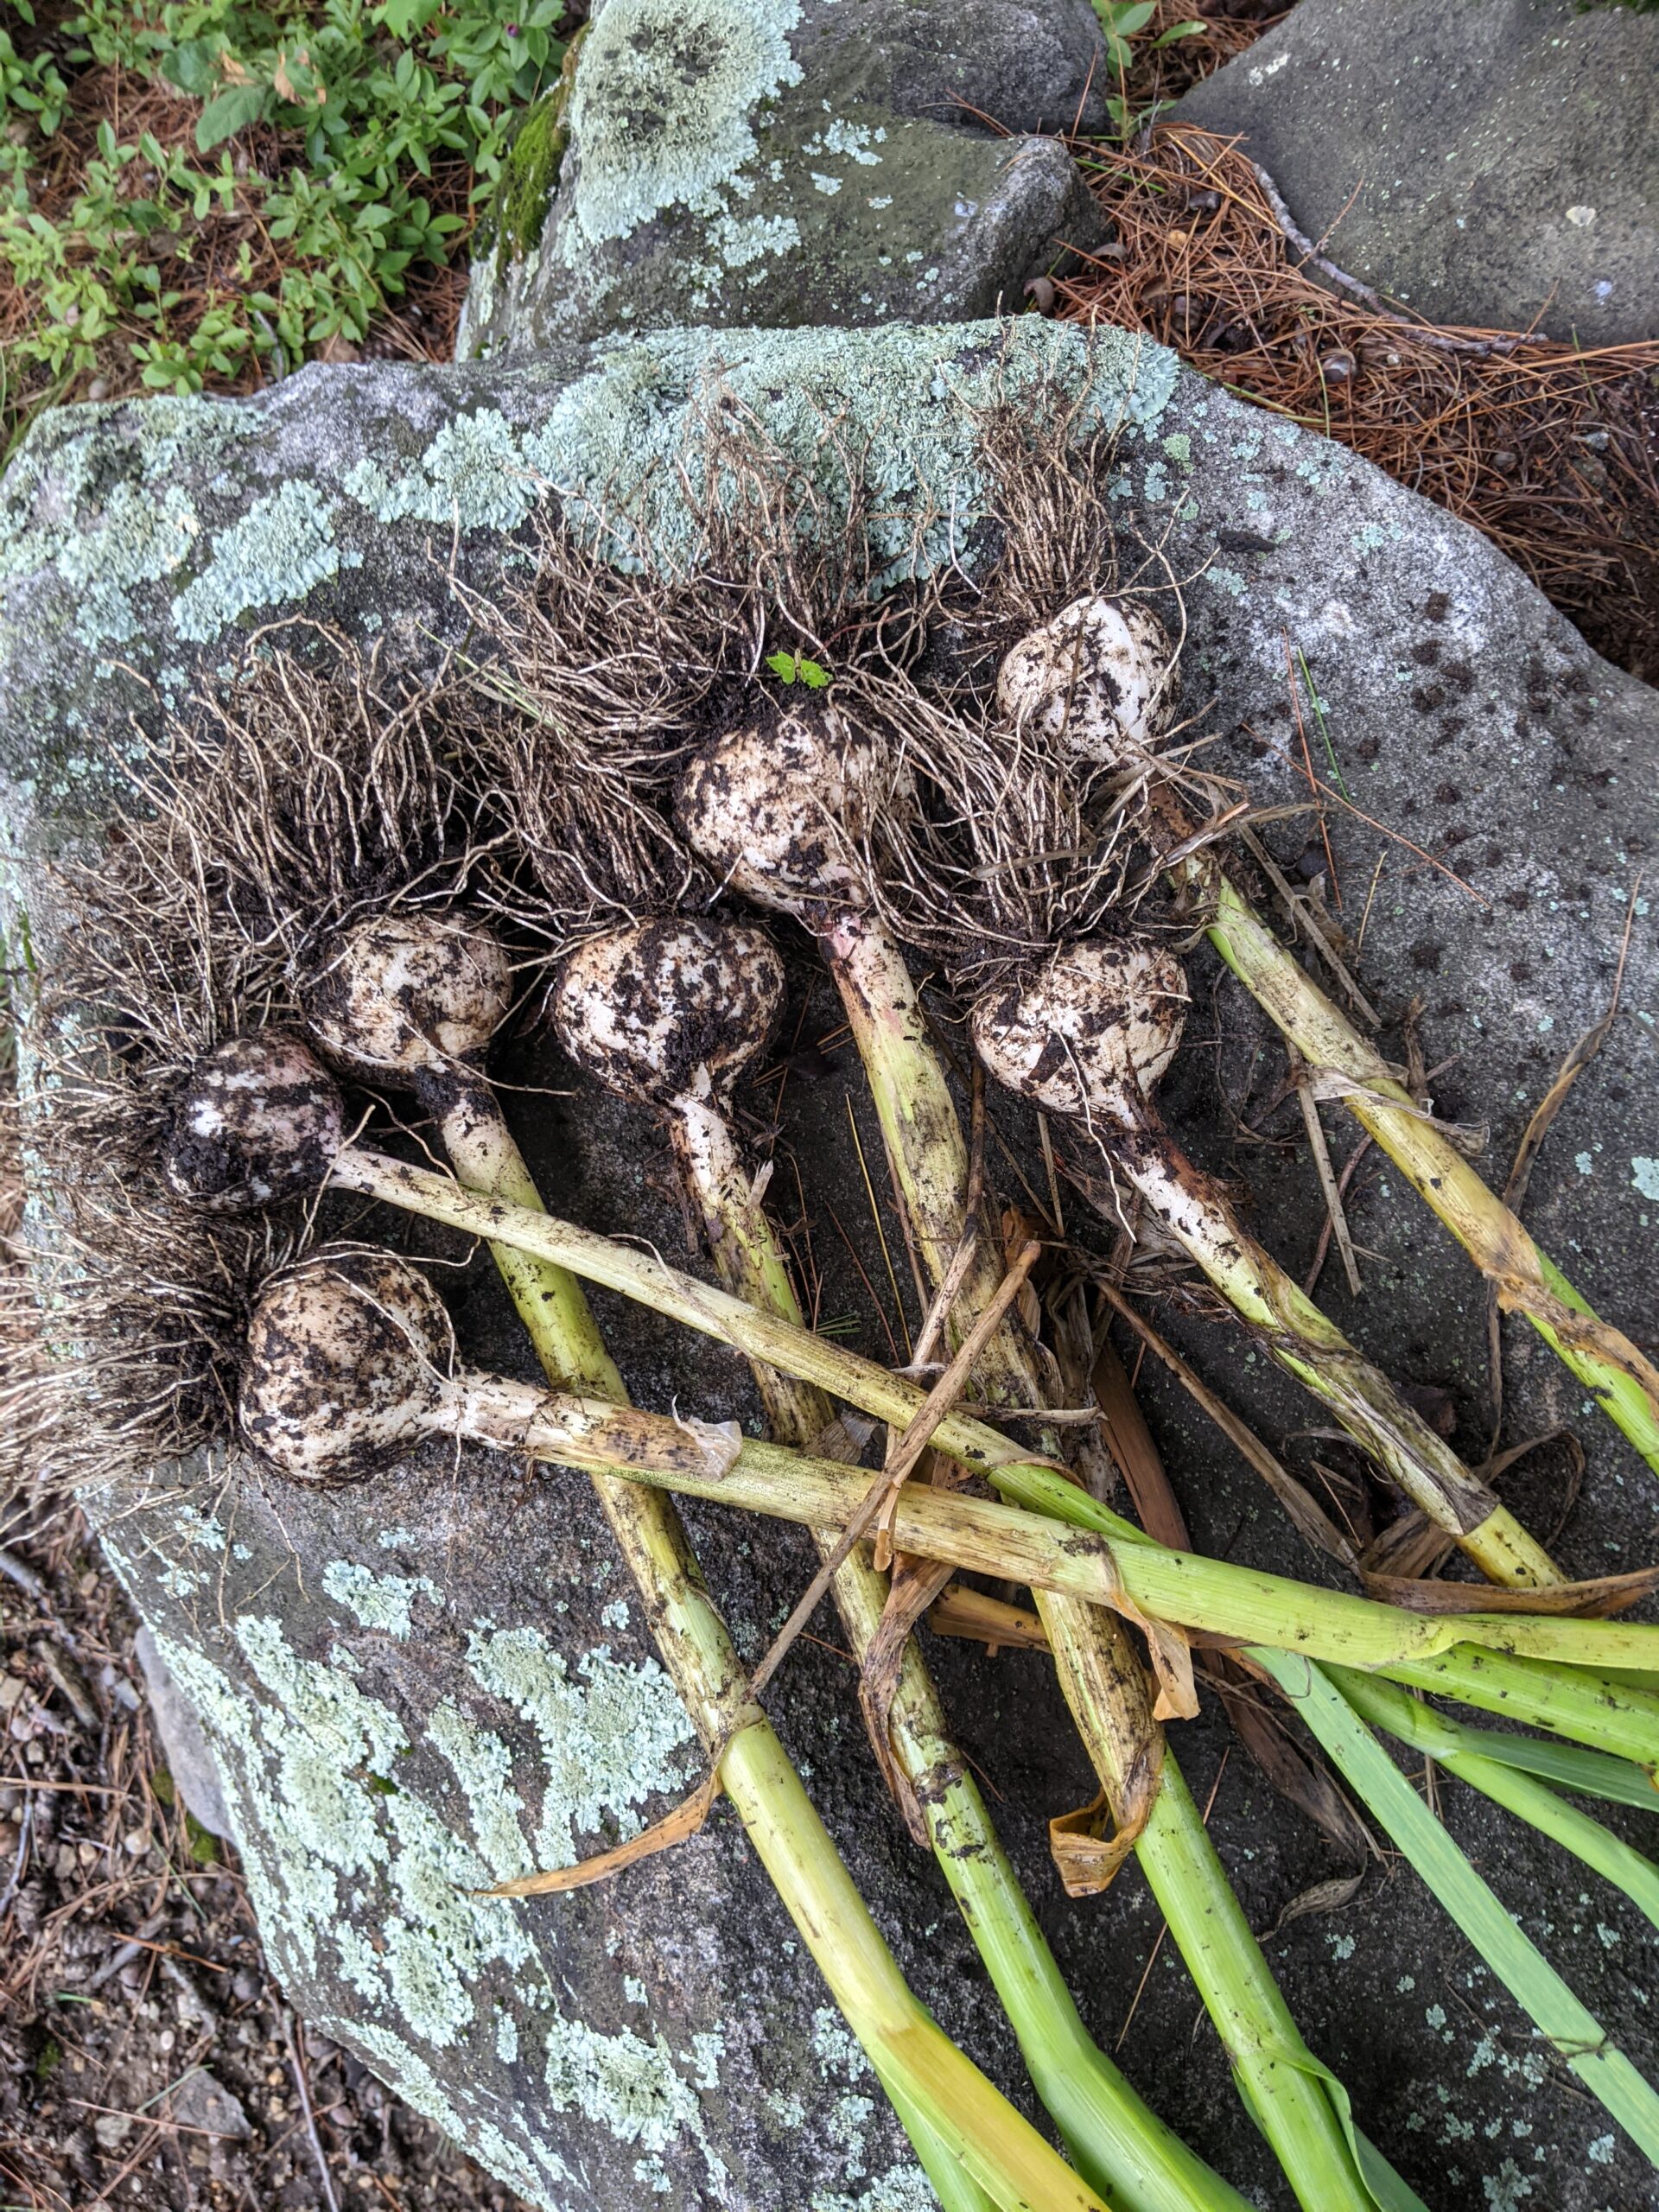 Seven heads of recently harvested garlic sit atop a rock